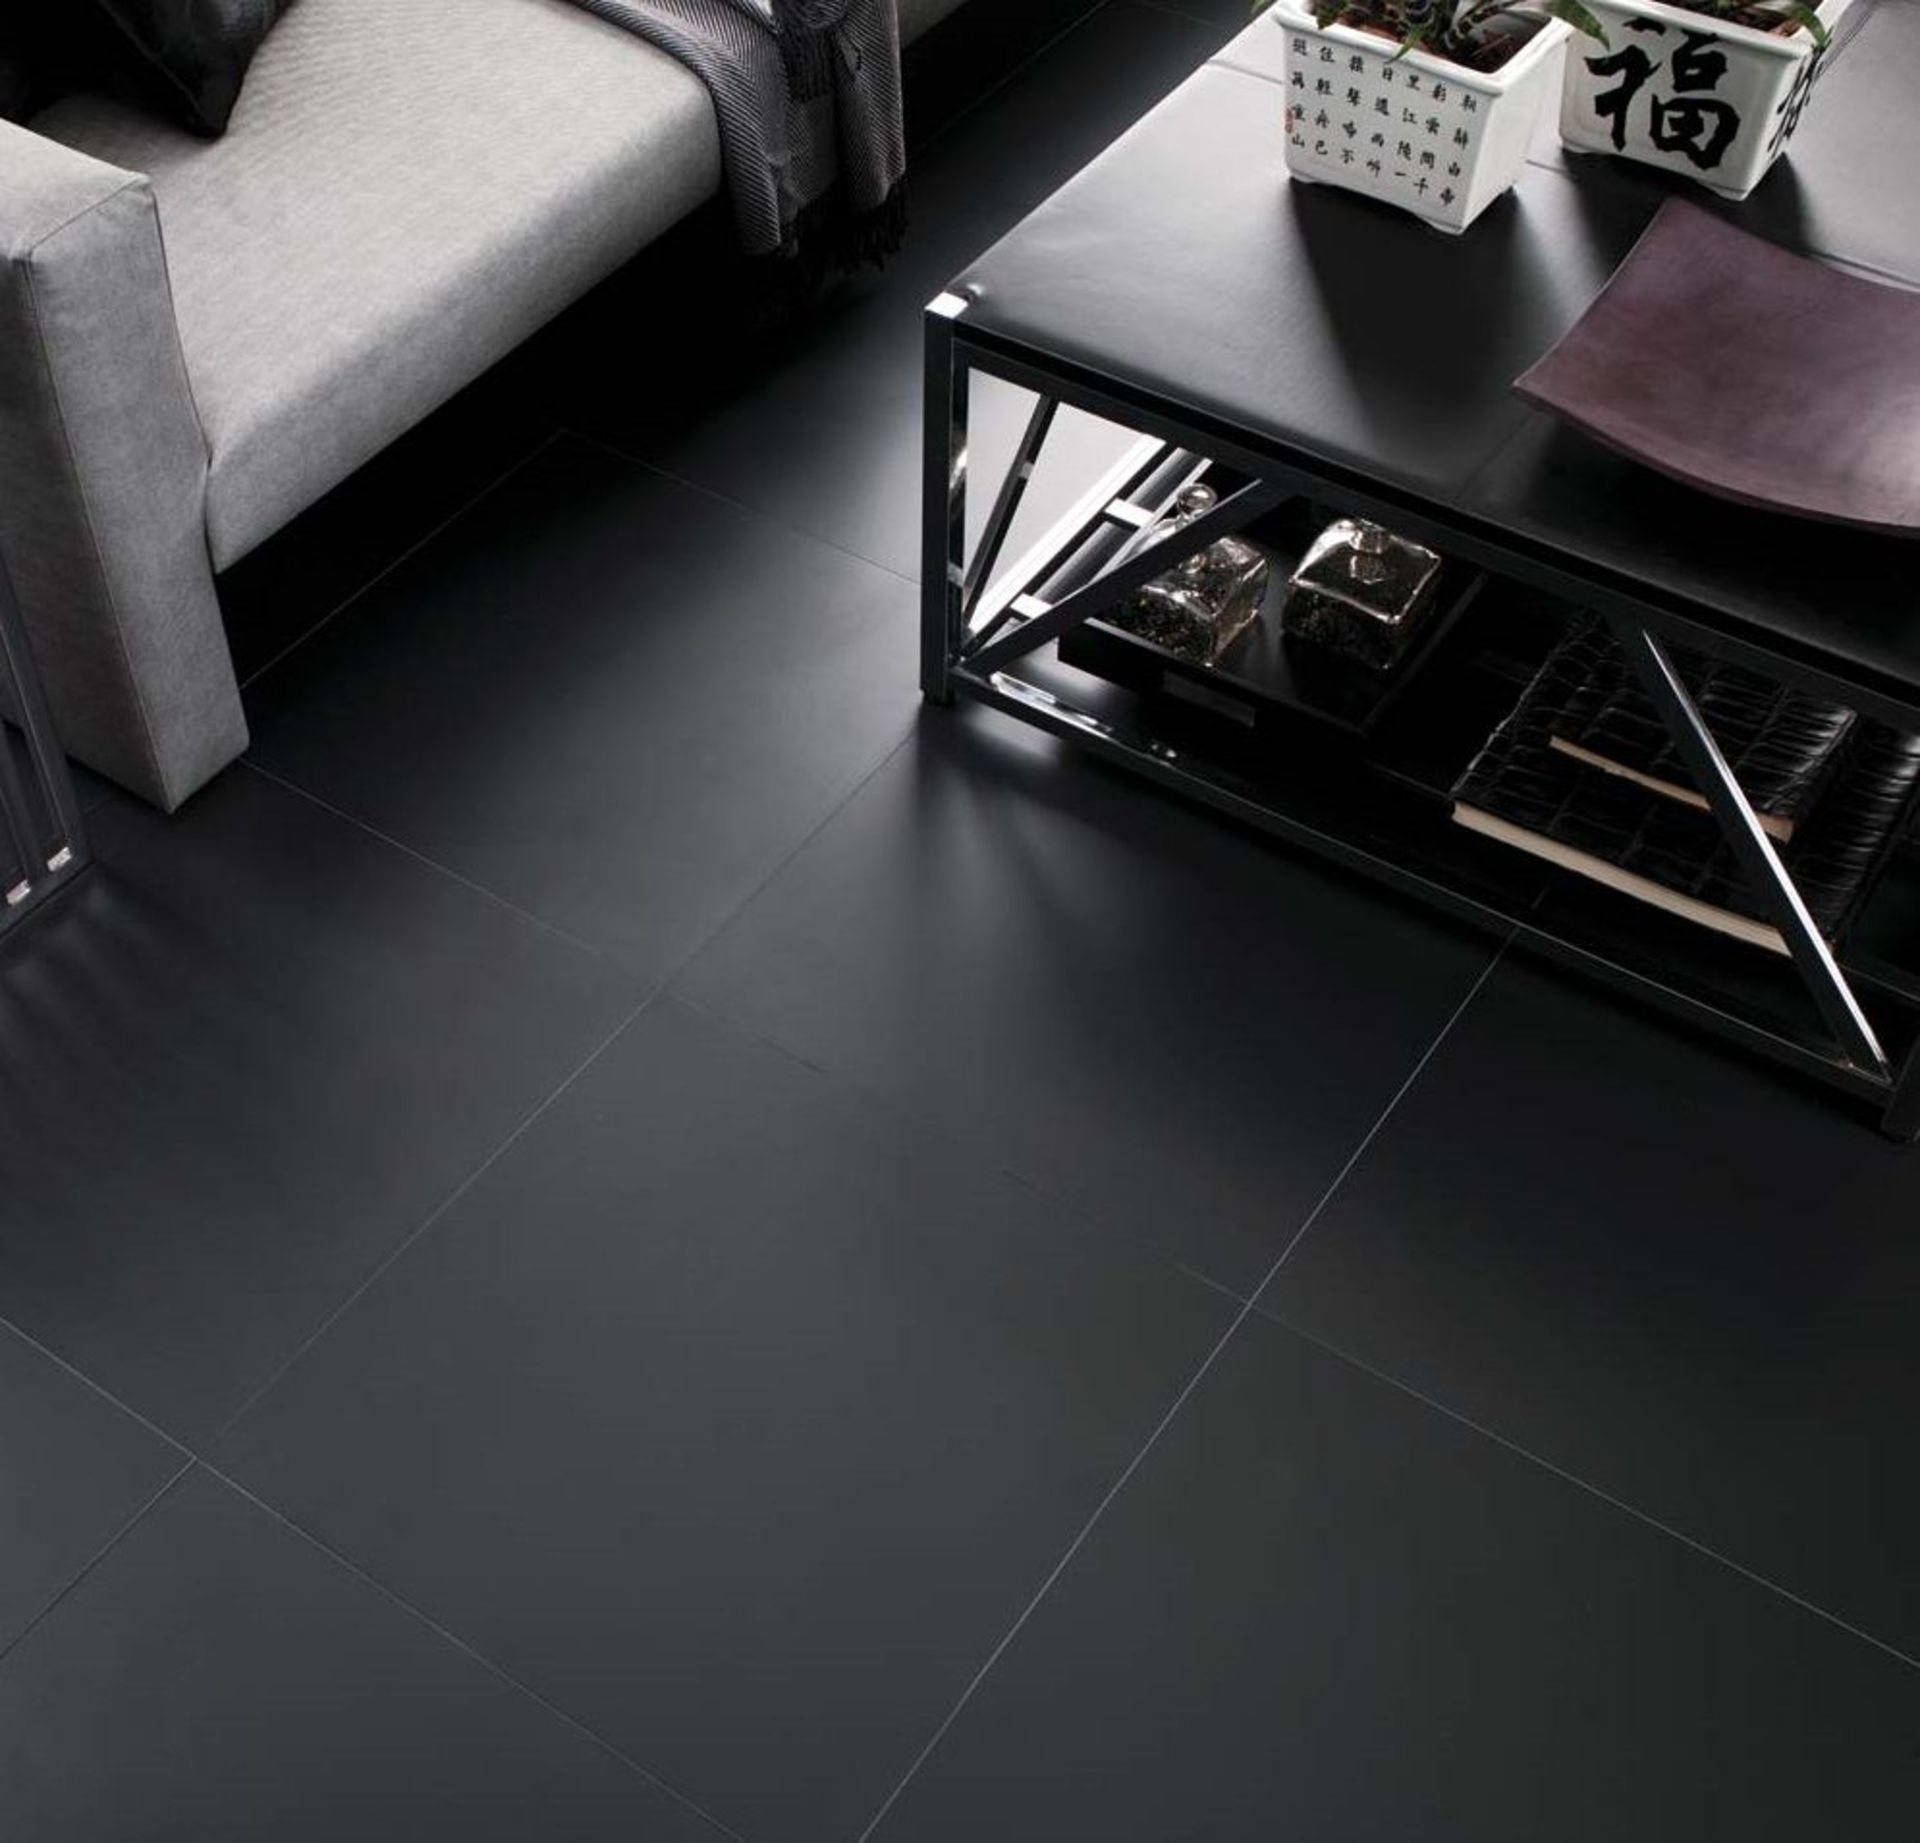 NEW 11.7m2 Porcelanosa Extreme Black Wall and Floor Tiles. 60x60cm per tile, 0.9m2 per pack. Bl...